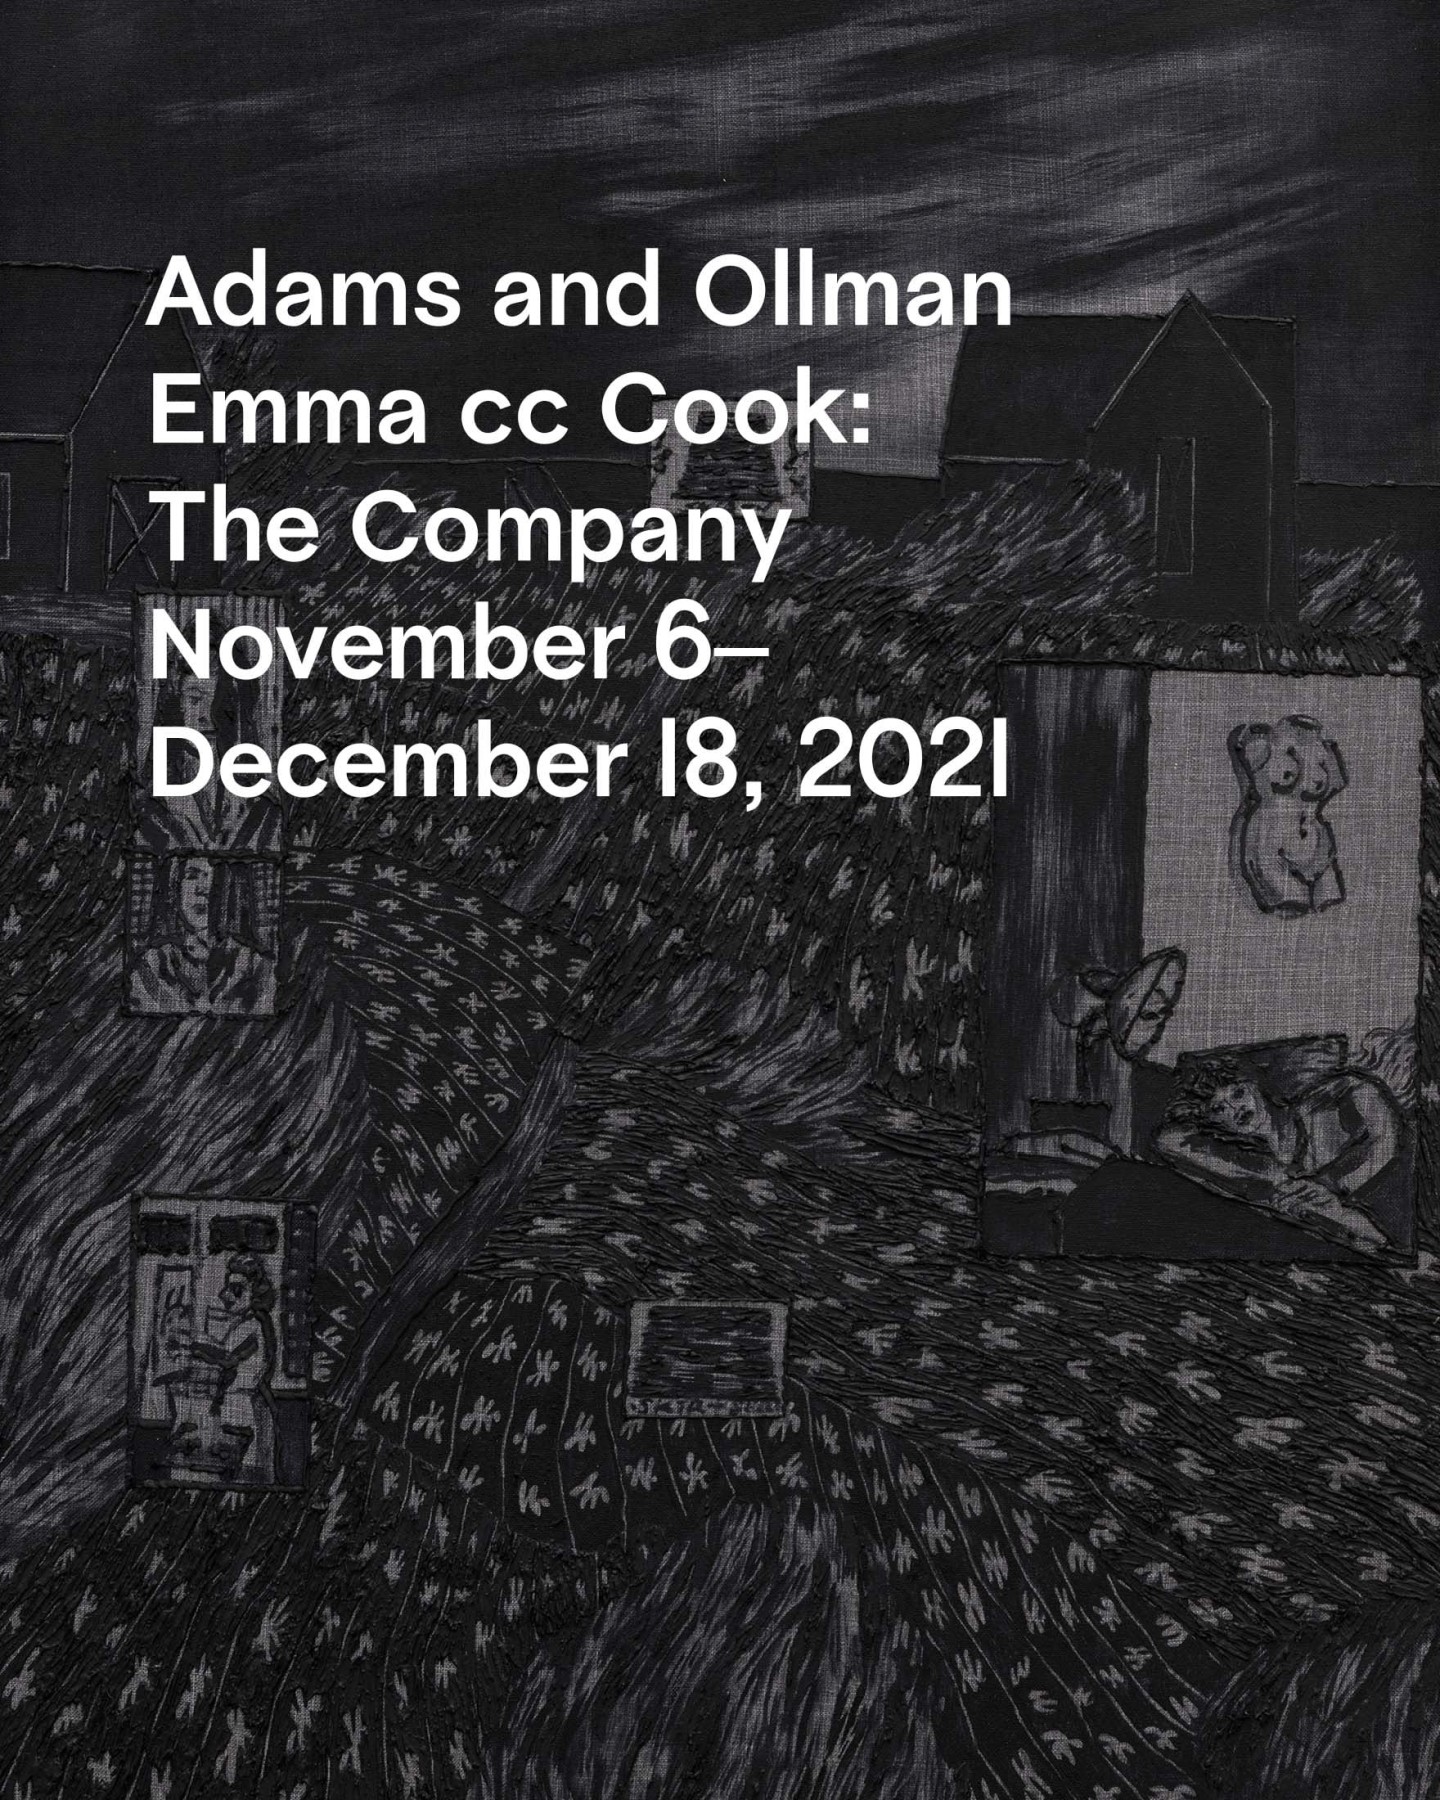 Emma cc Cook: The Company - November 6–December 18, 2021 - Viewing Room - Adams and Ollman Viewing Room